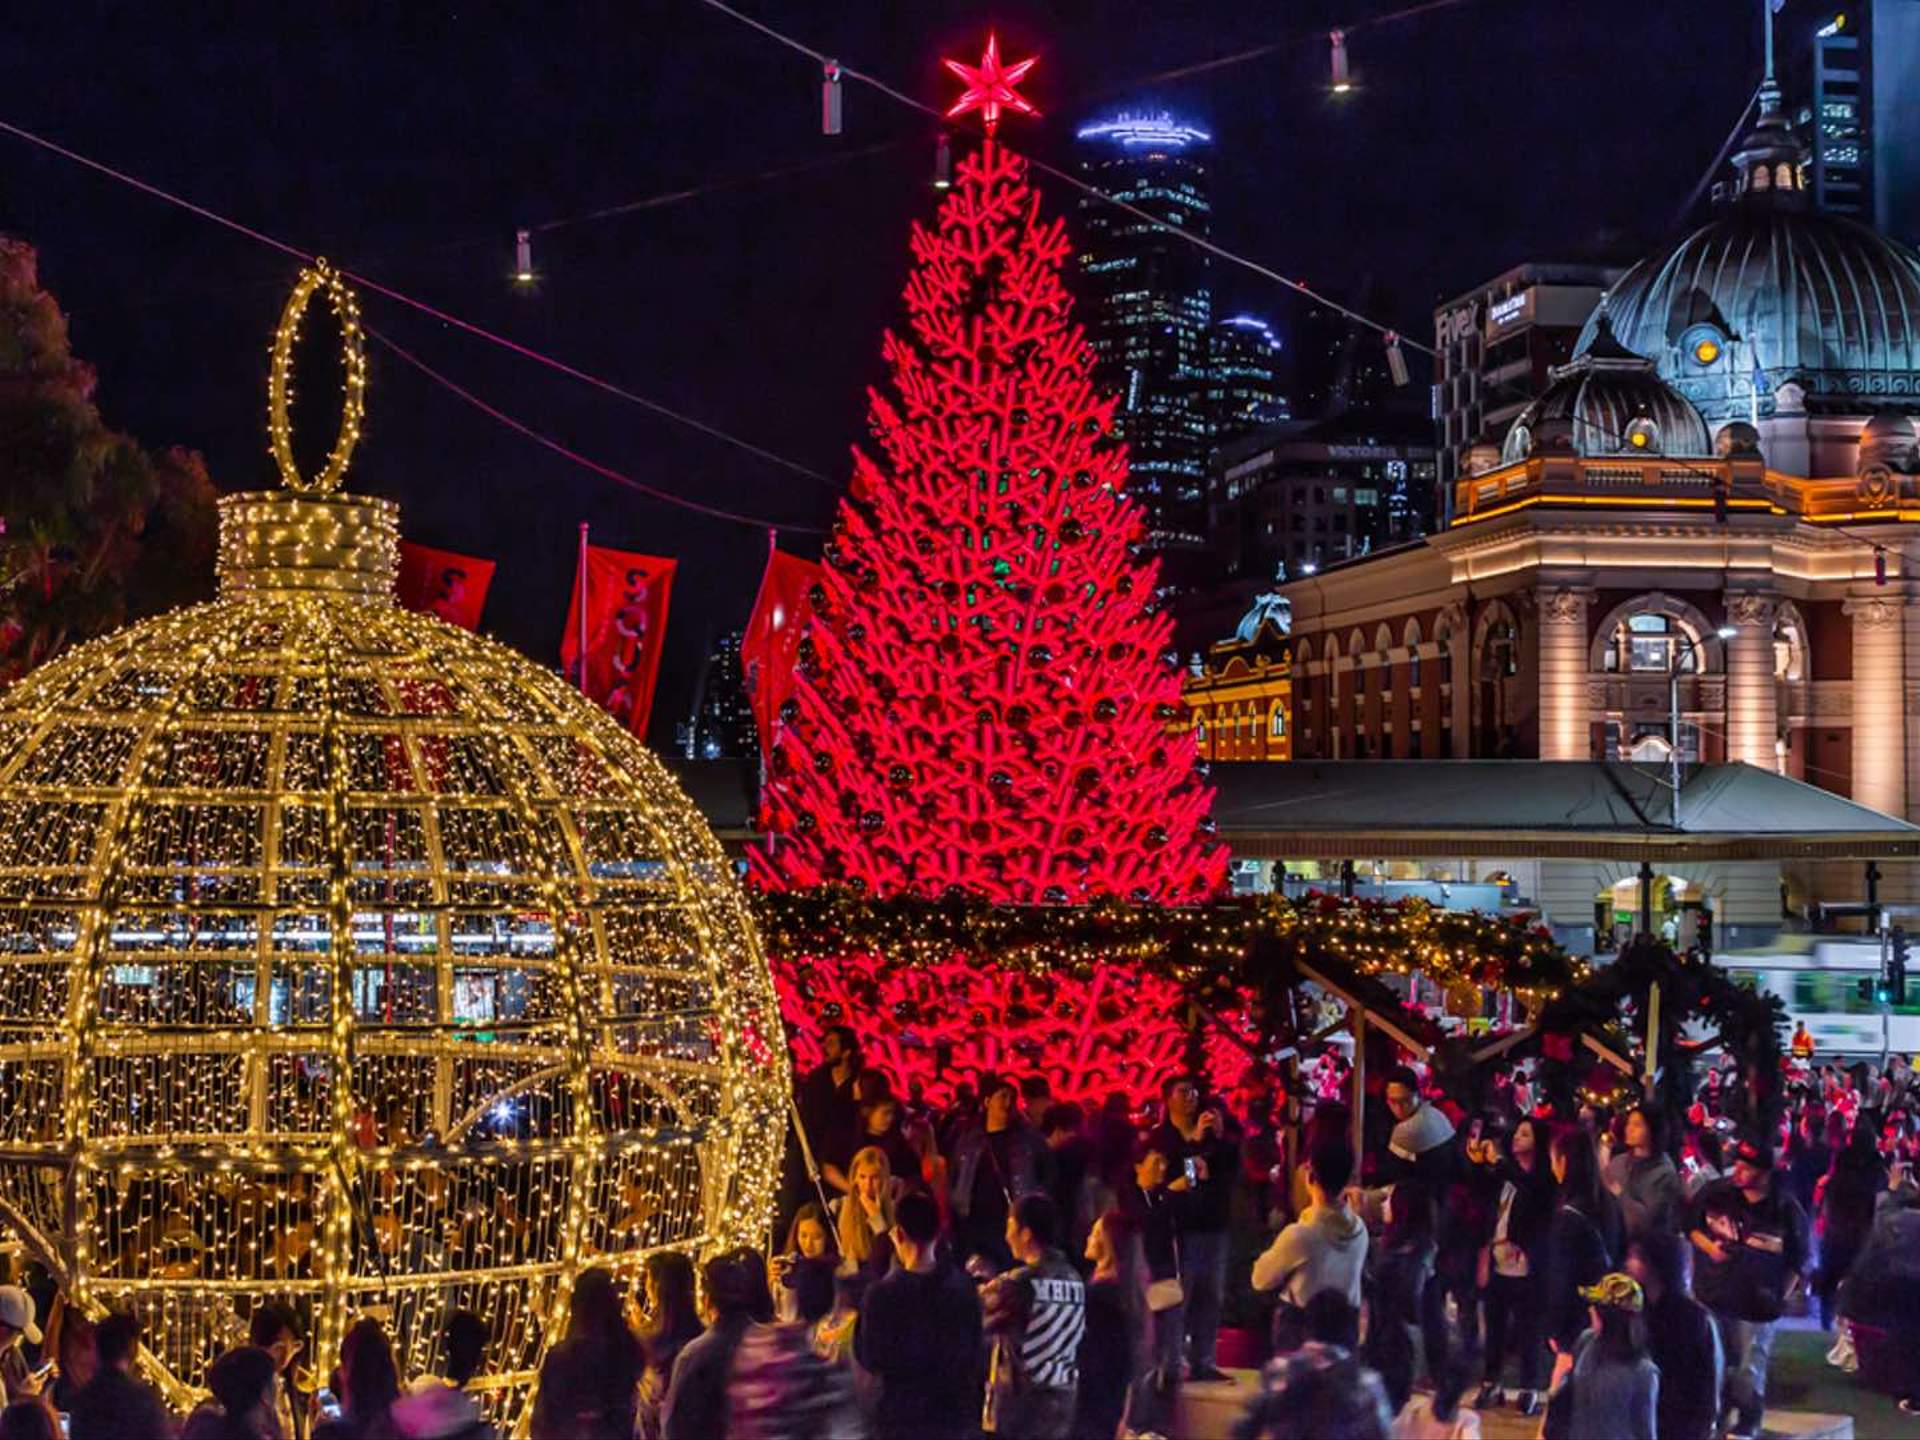 Melbourne's Annual Christmas Festival Is Bigger Than Ever This Year